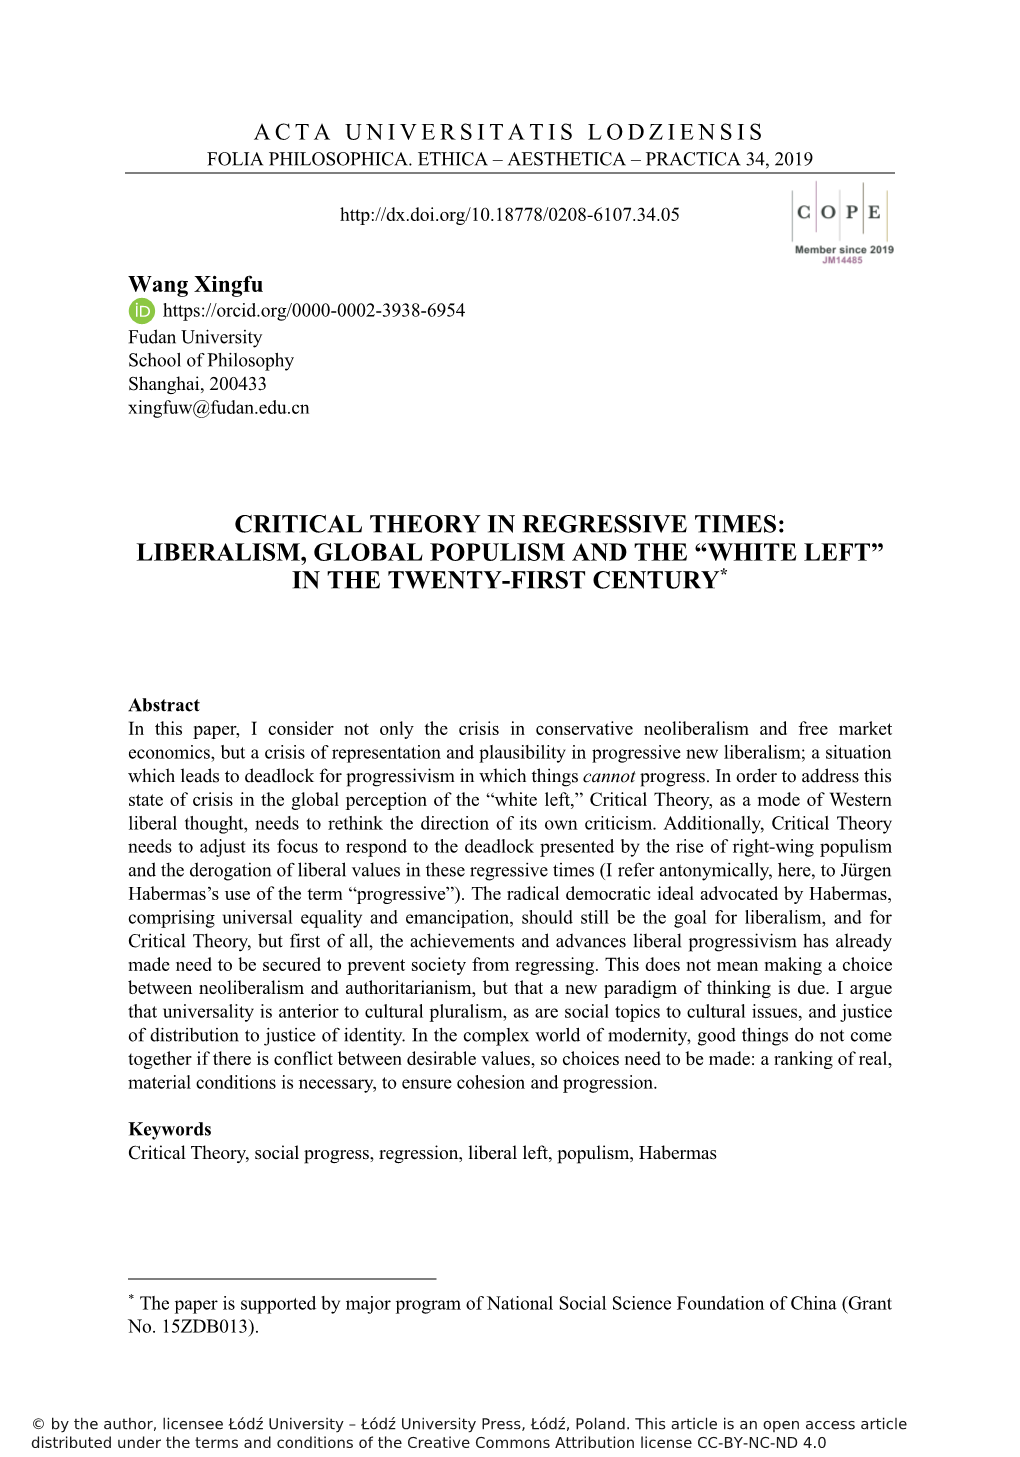 Critical Theory in Regressive Times: Liberalism, Global Populism and the “White Left” in the Twenty-First Century*